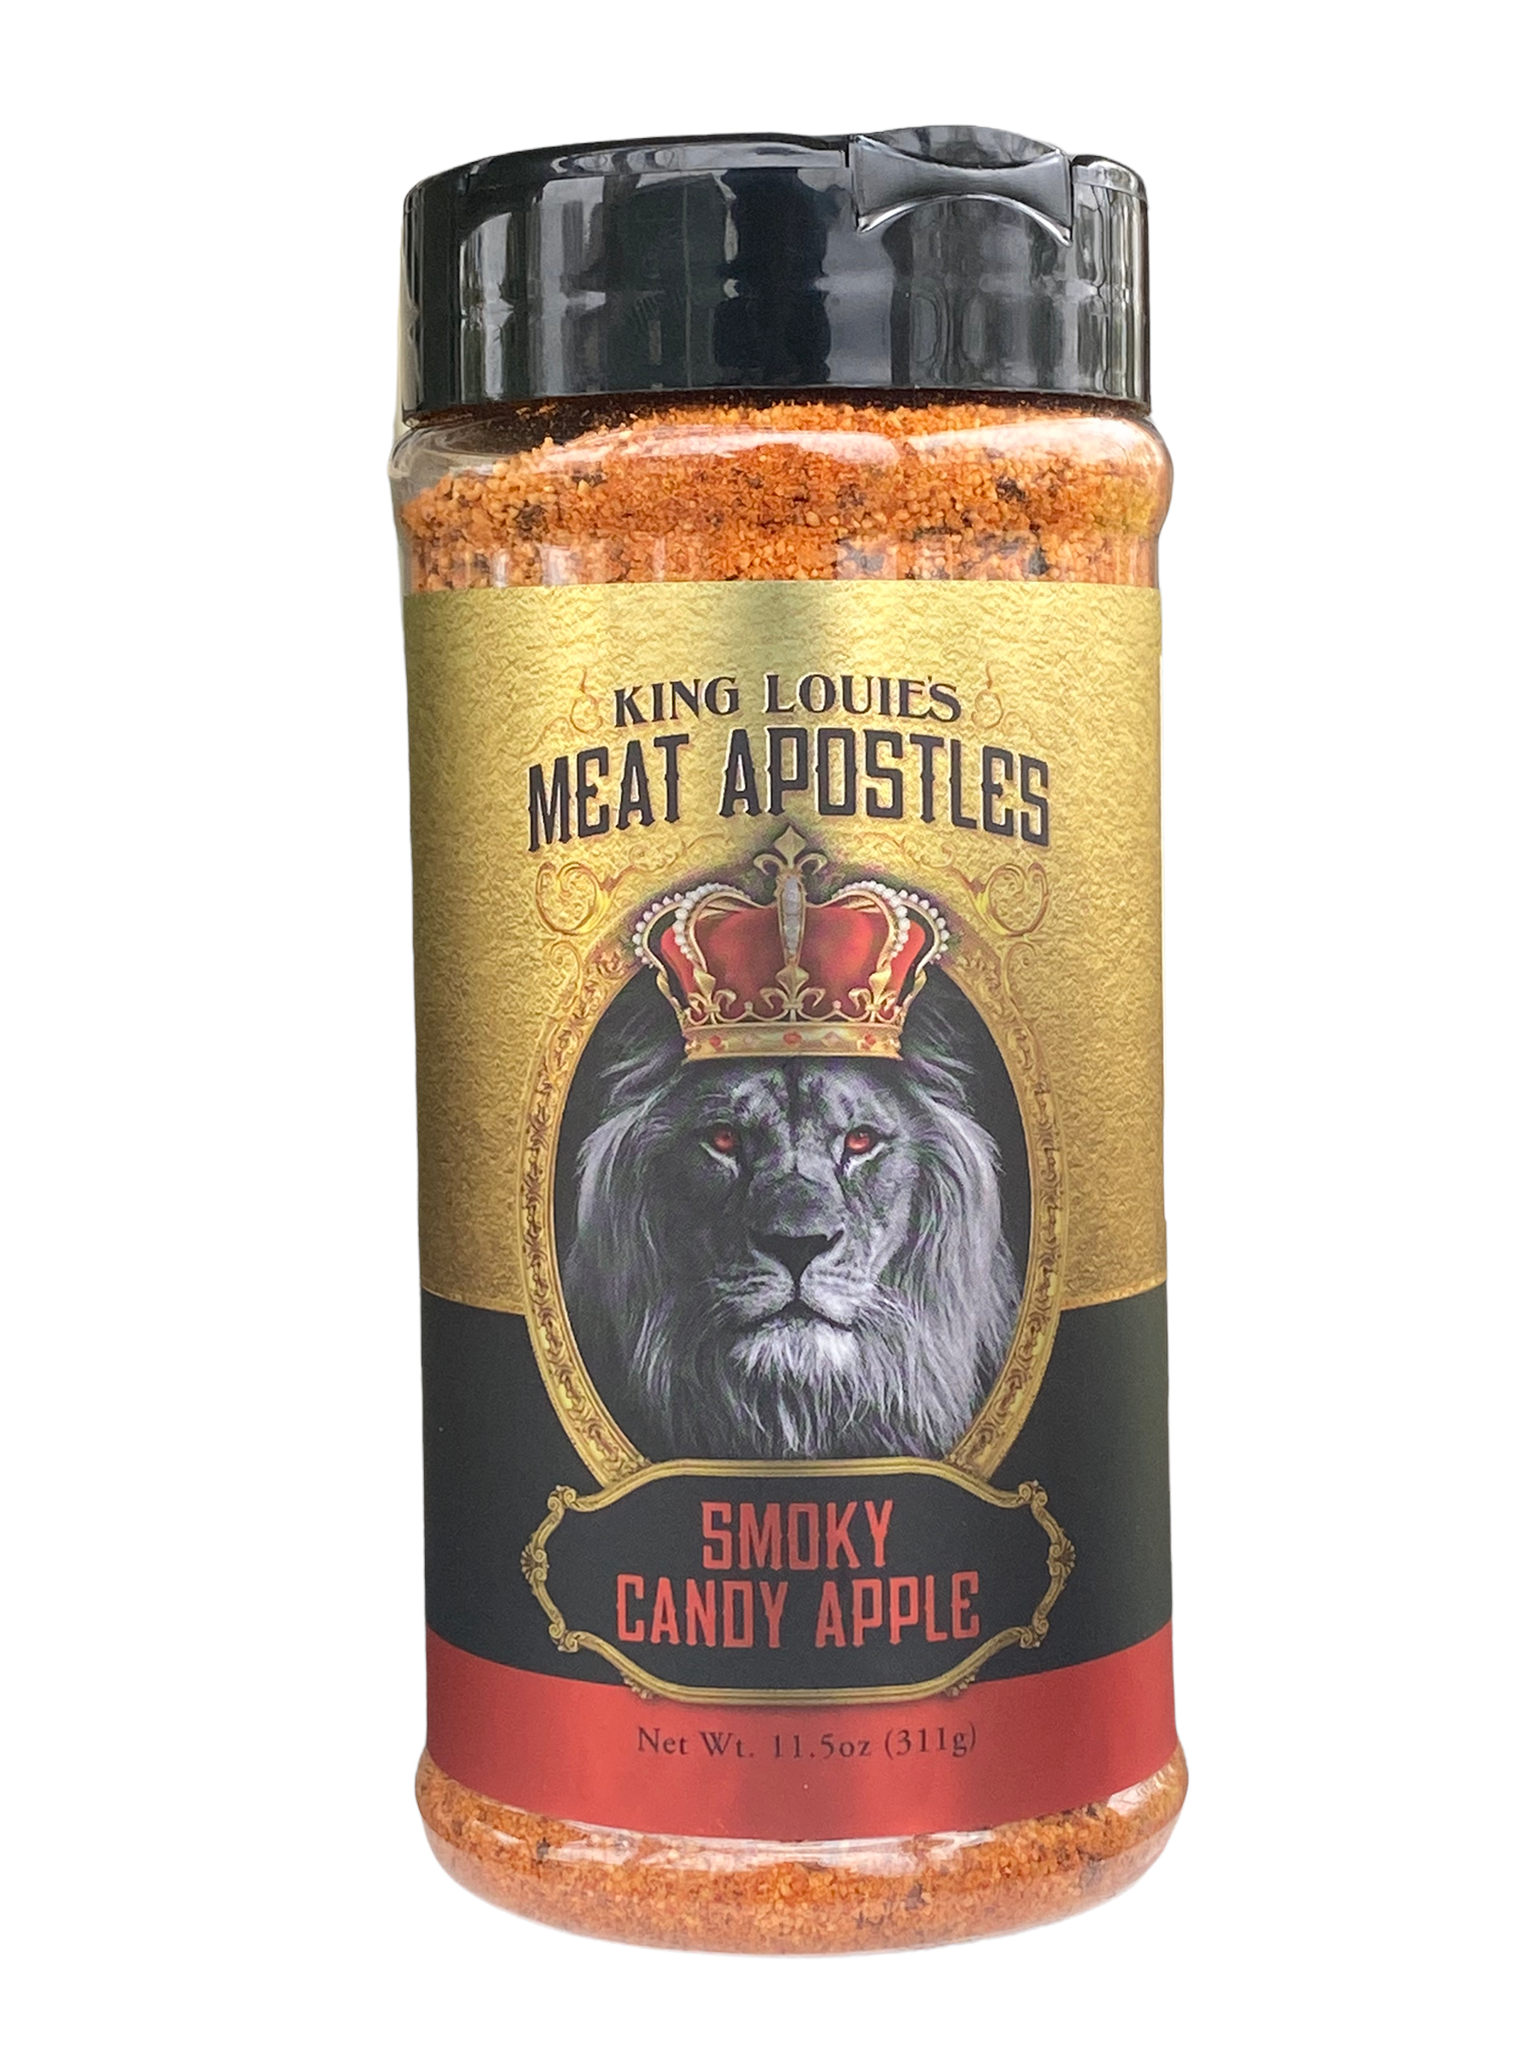 Meat Apostles Smoky Candy Apple